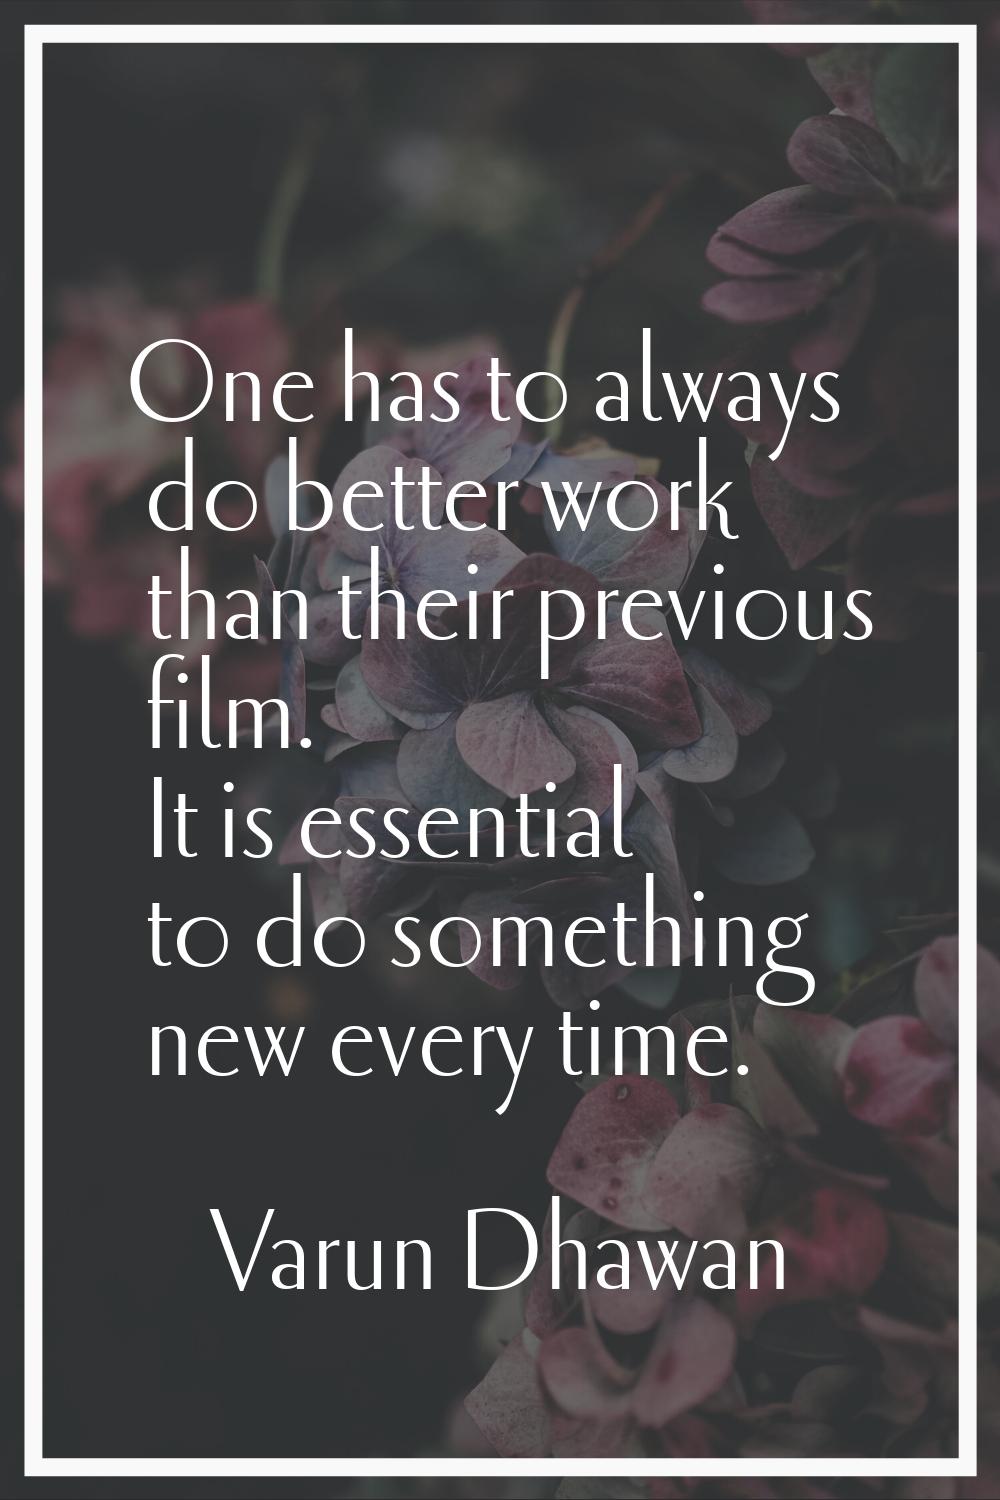 One has to always do better work than their previous film. It is essential to do something new ever